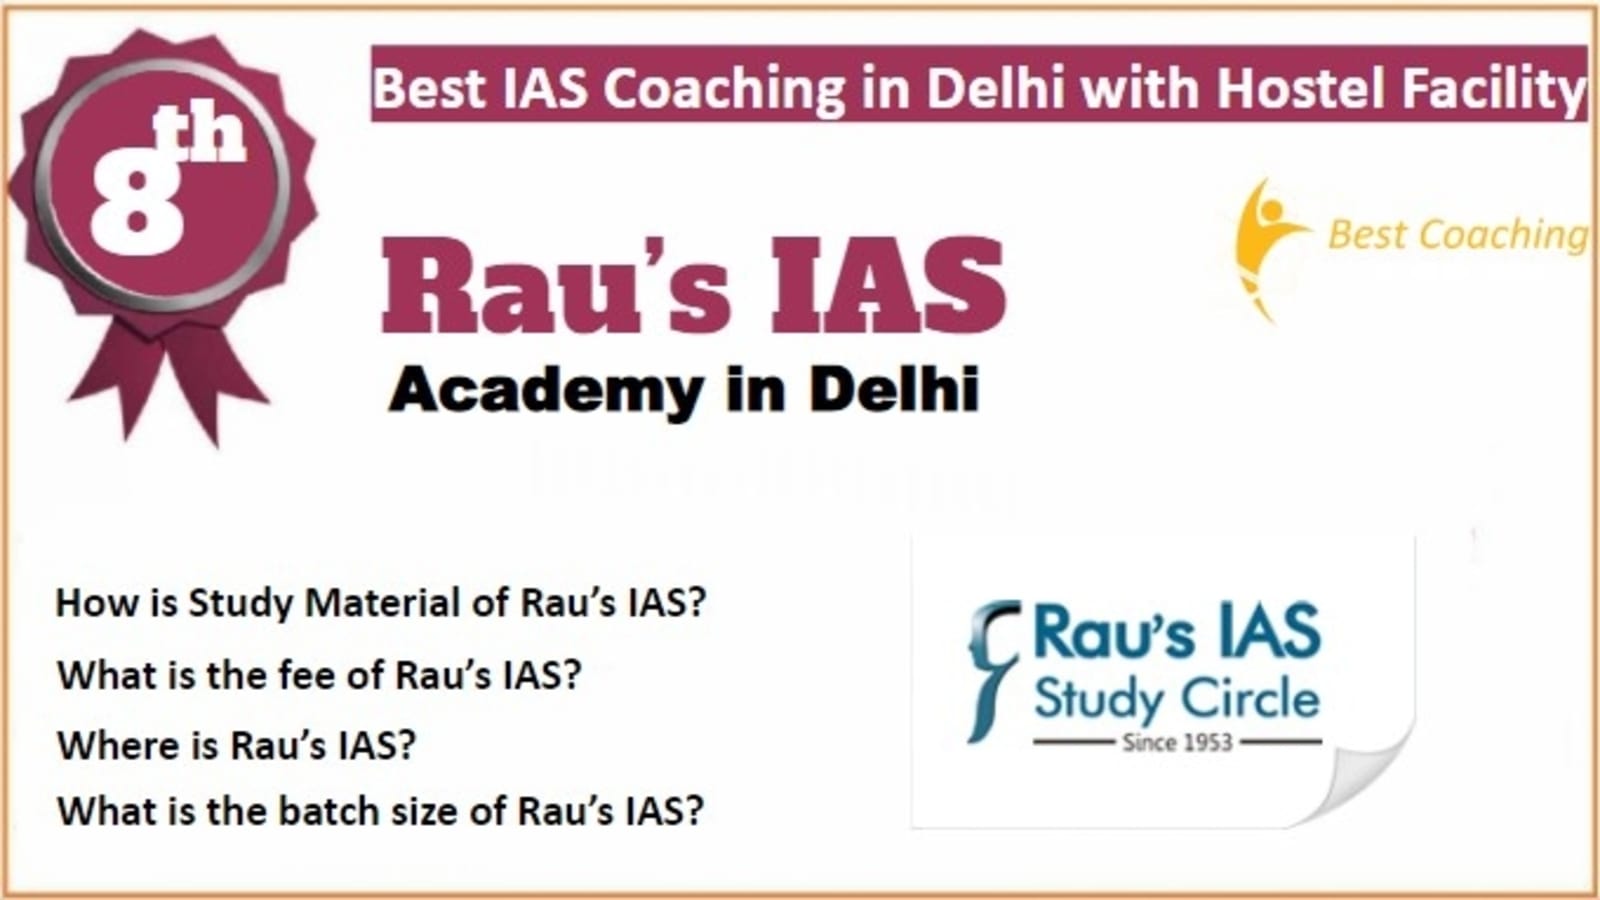 Rank 8 Best IAS Coaching in Delhi with Hostel Facility